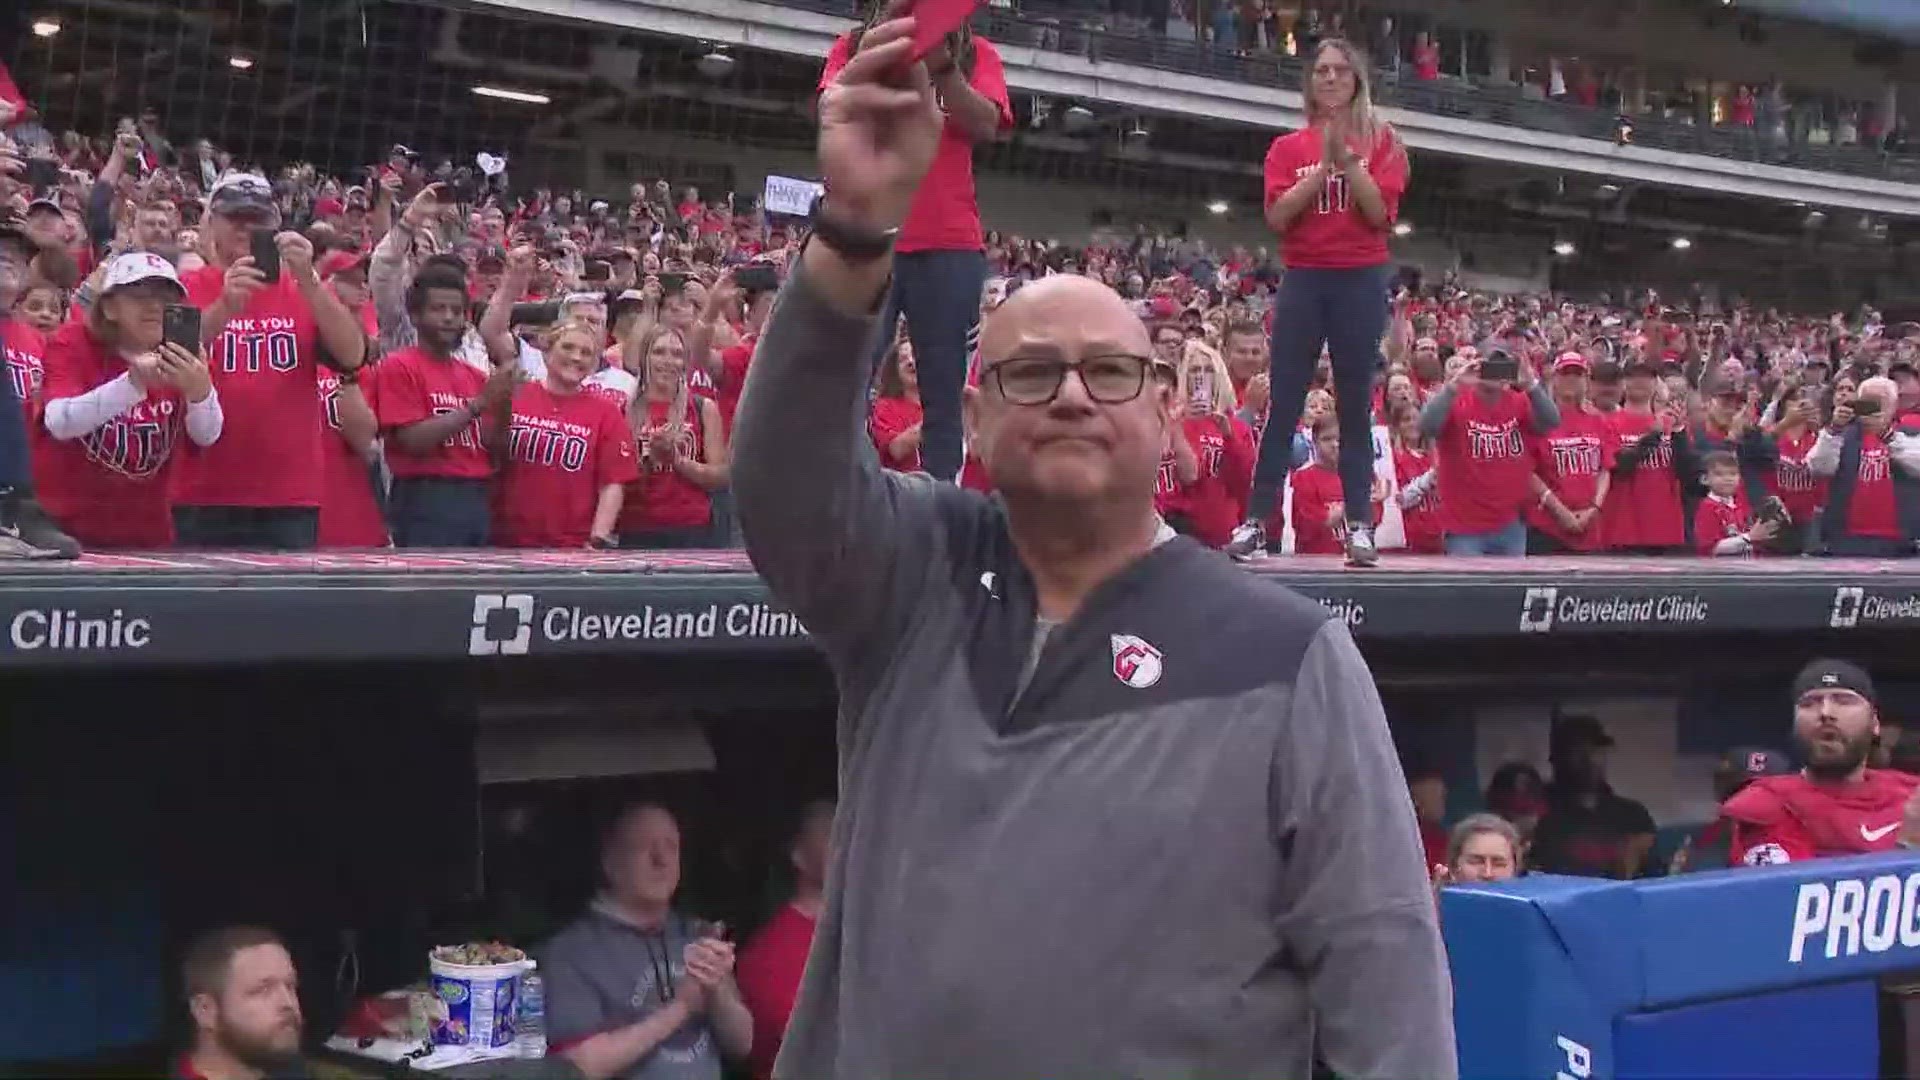 With thousands of fans chanting his name while wearing 'Thank You Tito' T-shirts, Francona said goodbye to Progressive Field after 11 seasons in the dugout.